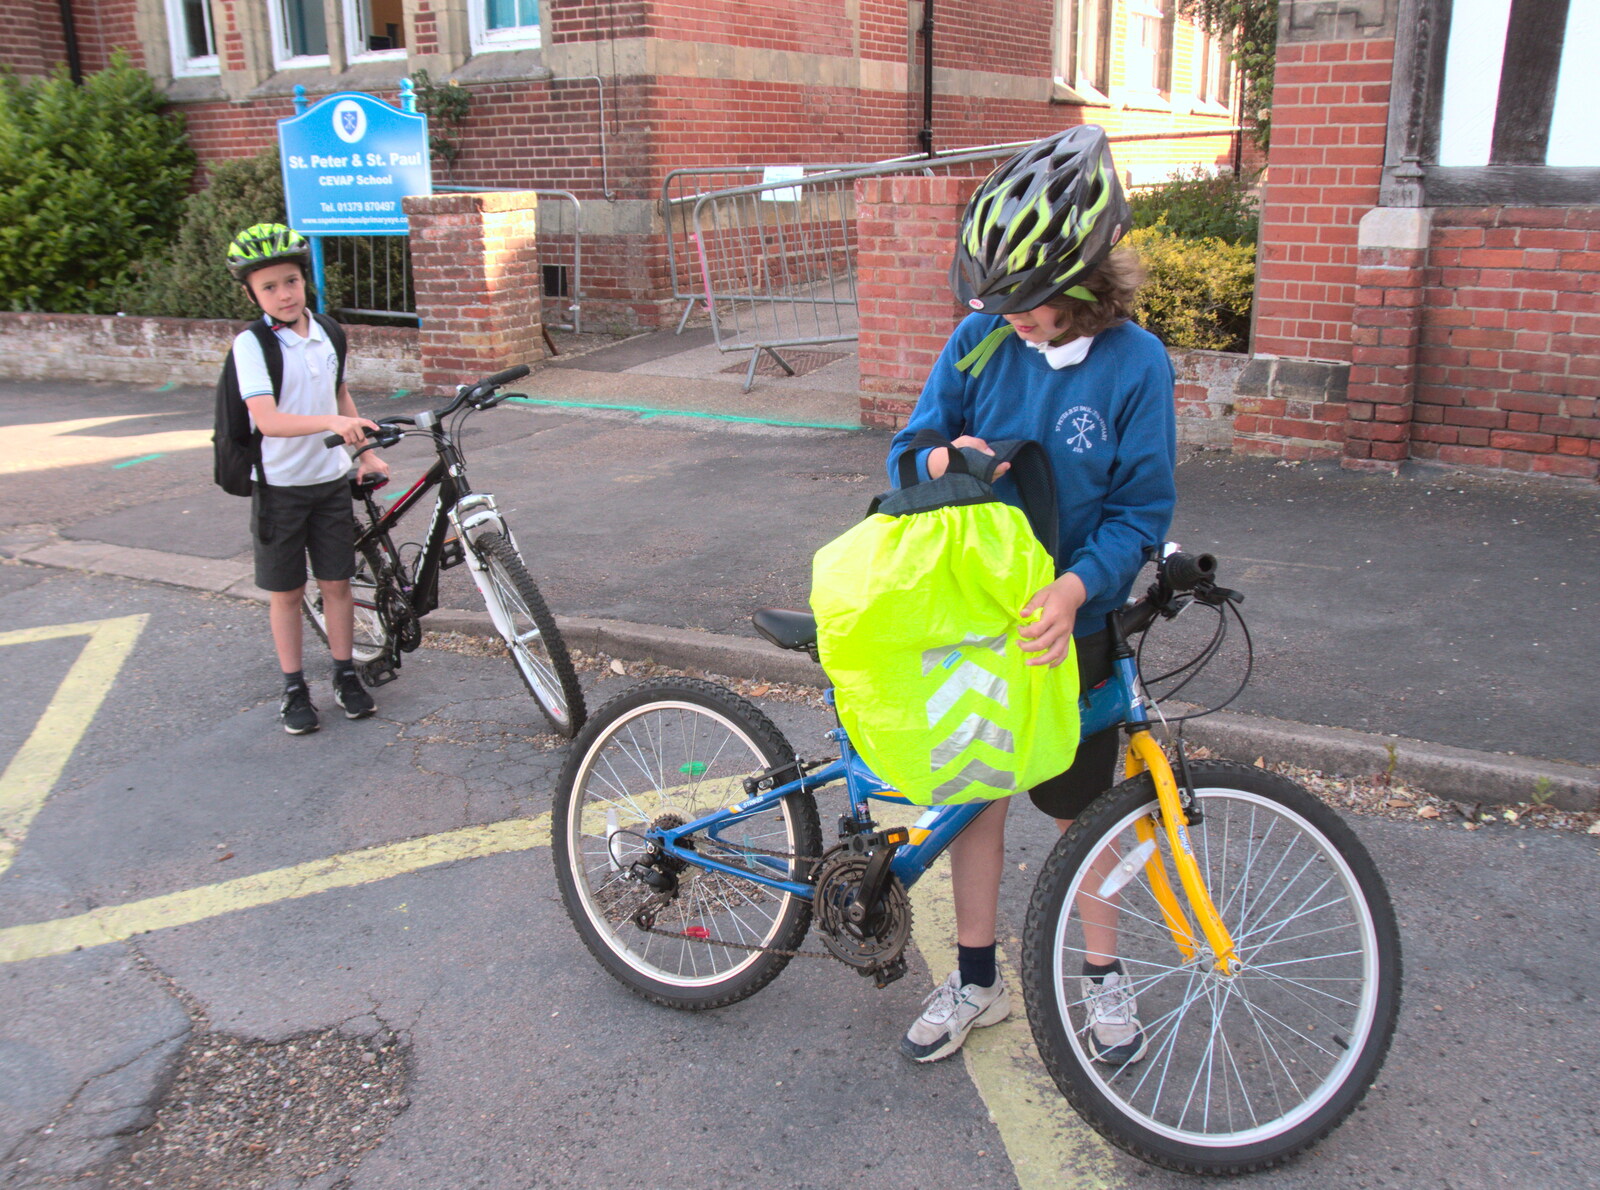 Henry and Fred arrive at school by bike from The Old Brickworks and a New Road, Hoxne and Eye, Suffolk - 26th May 2020